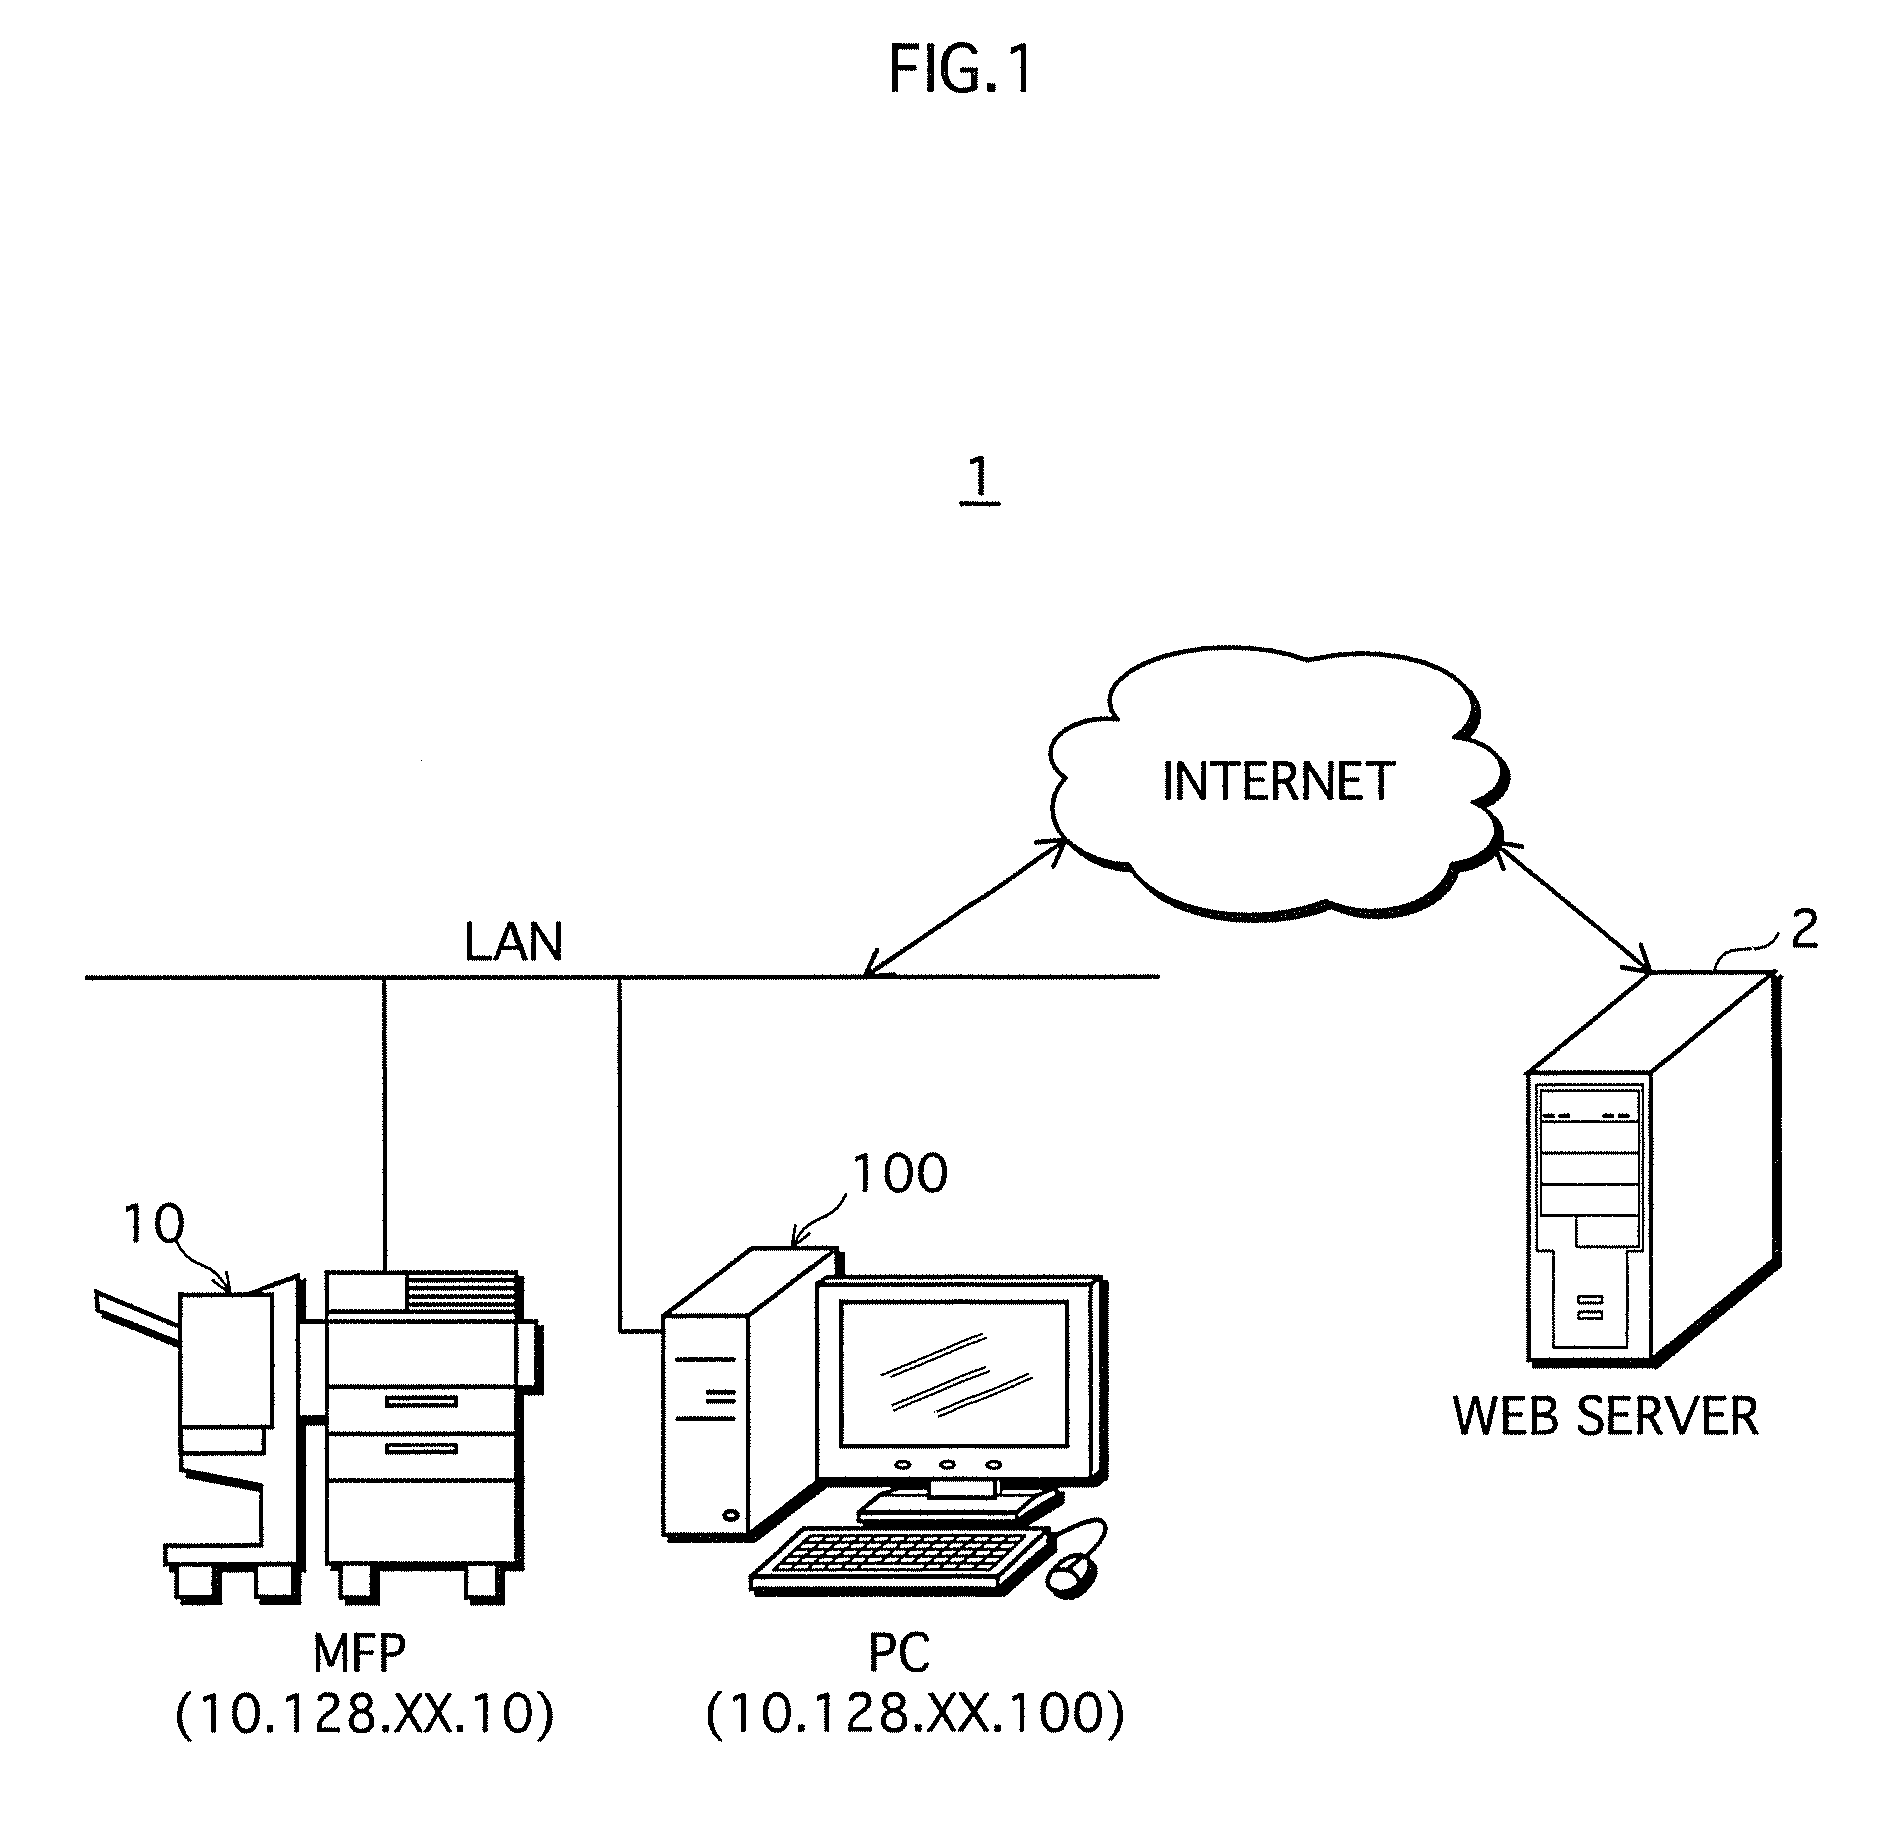 Image processing apparatus, information transmission method and image processing system